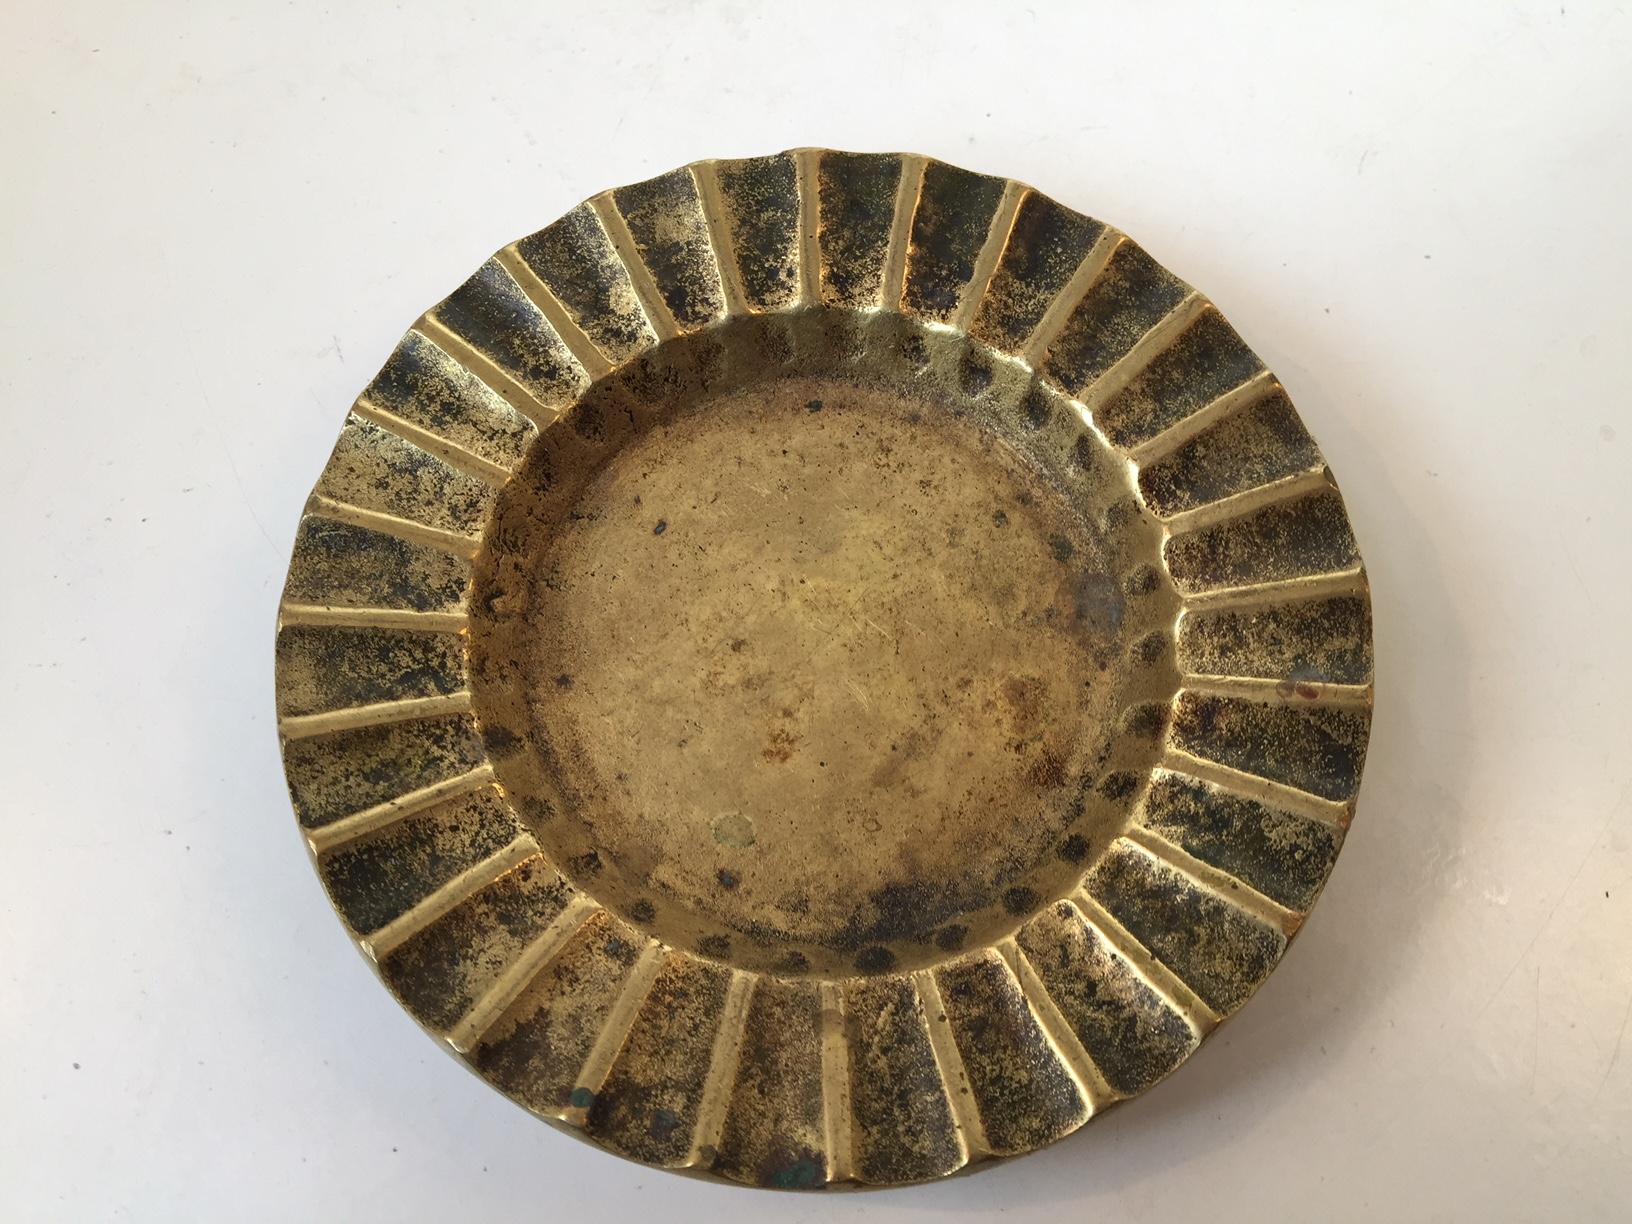 This decorative and heavy ashtray or coin tray comes in partially fluted cast bronze. It was manufactured by Ægte Bronce in Denmark during the 1930s. The style of this piece is reminiscent of the designs by Tinos and Vendor.